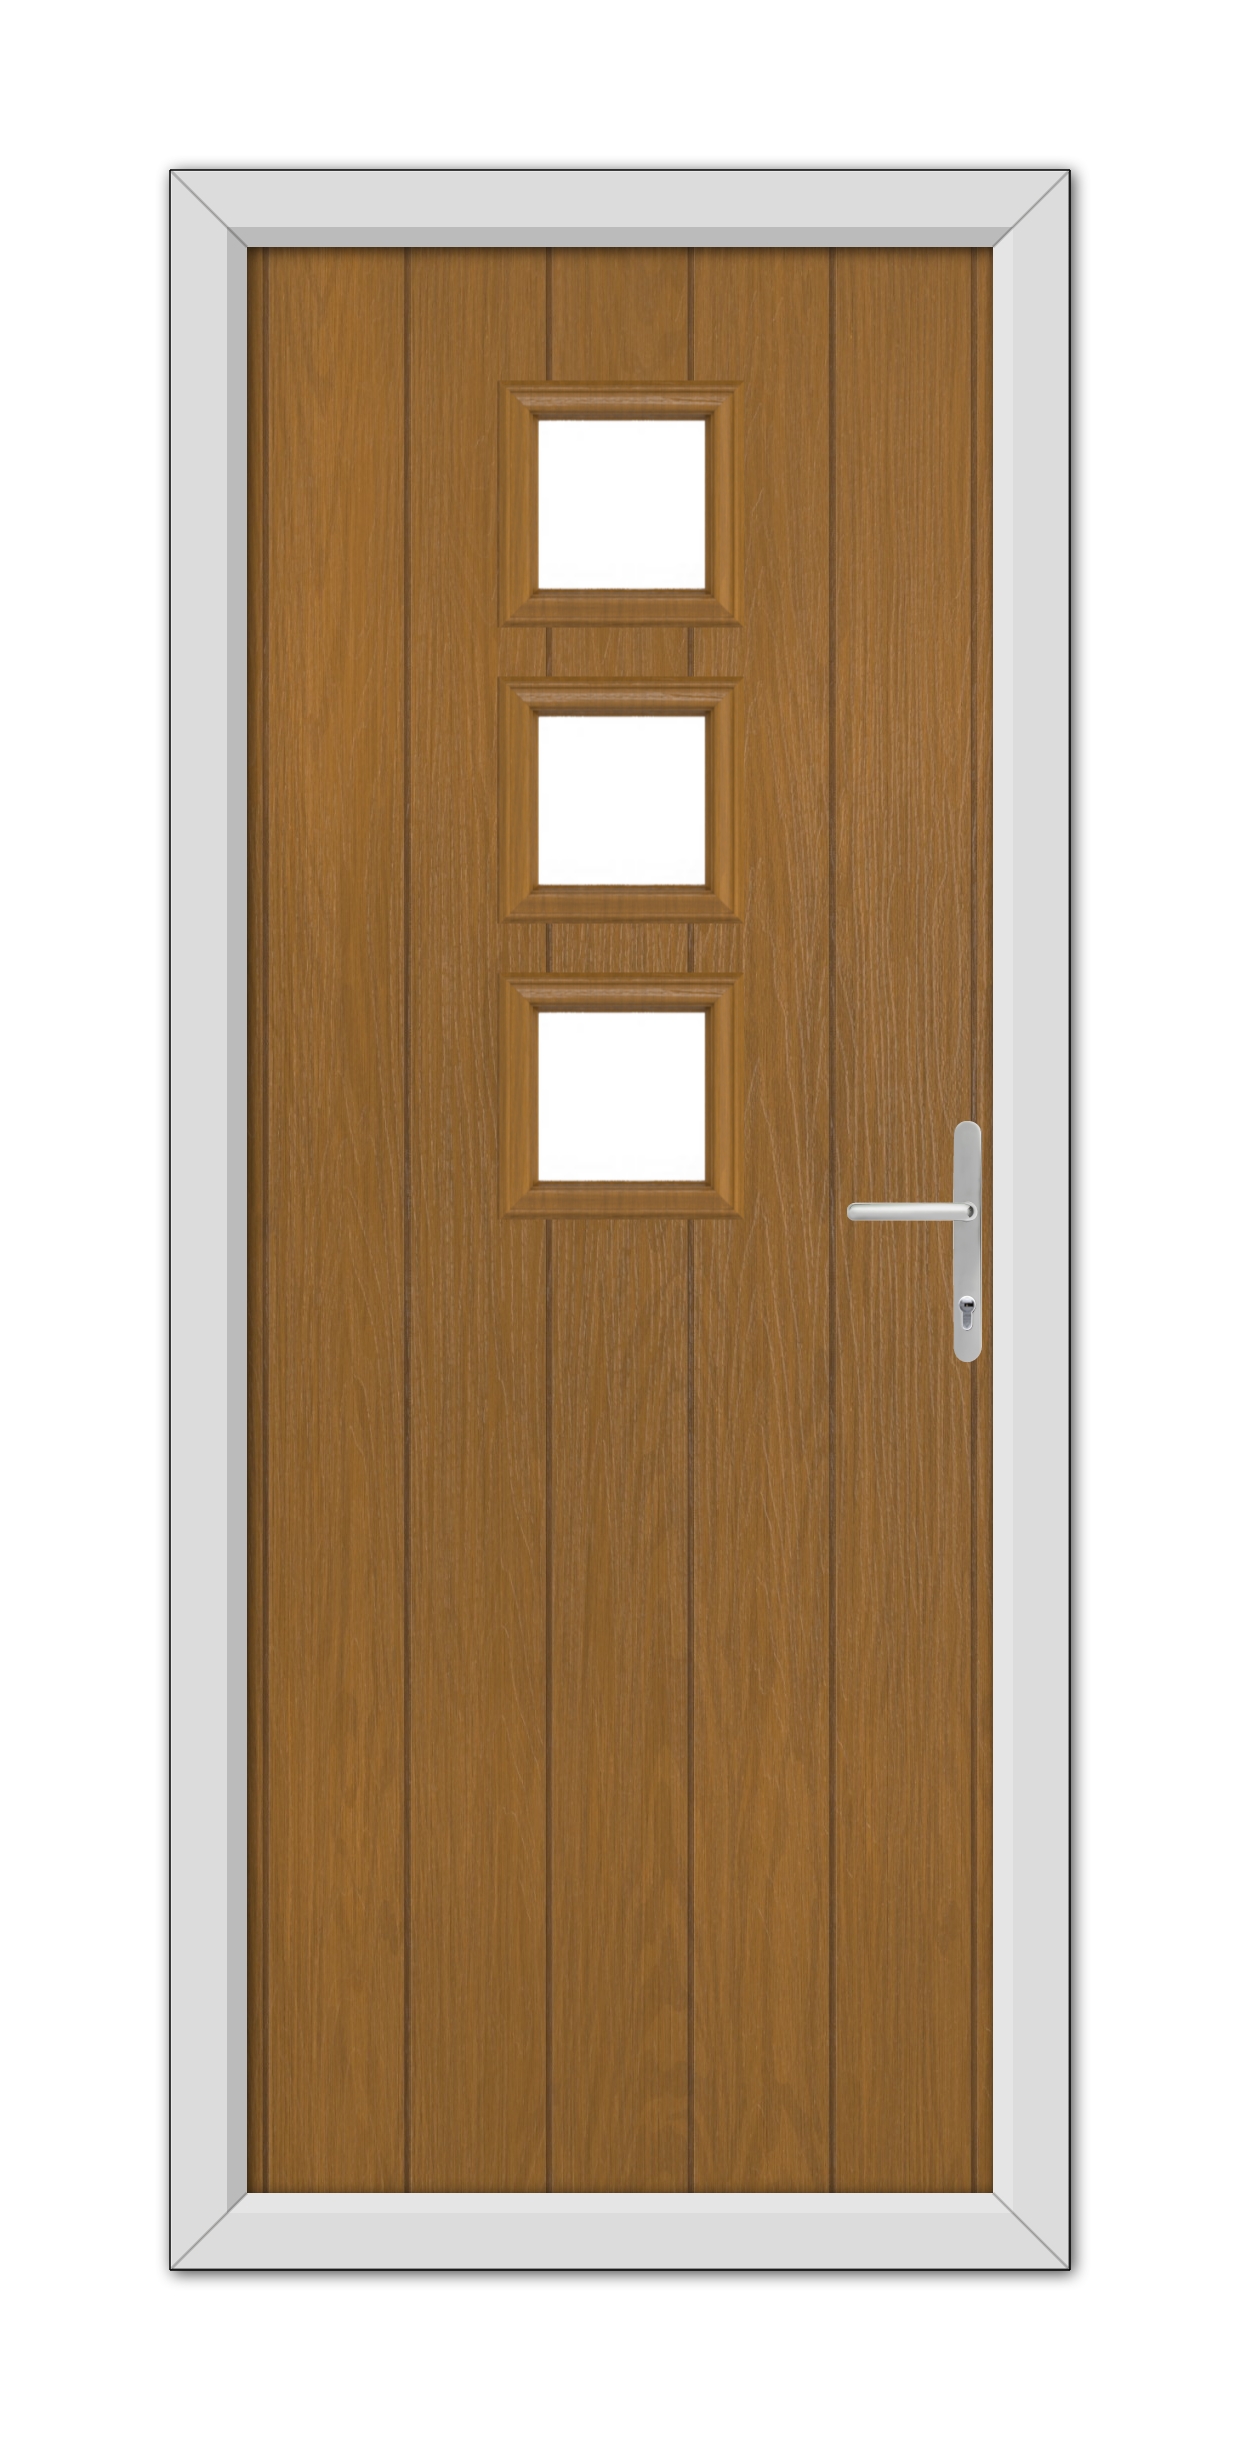 A modern Oak Montrose Composite Door 48mm Timber Core with three square windows and a silver handle, set within a white frame.